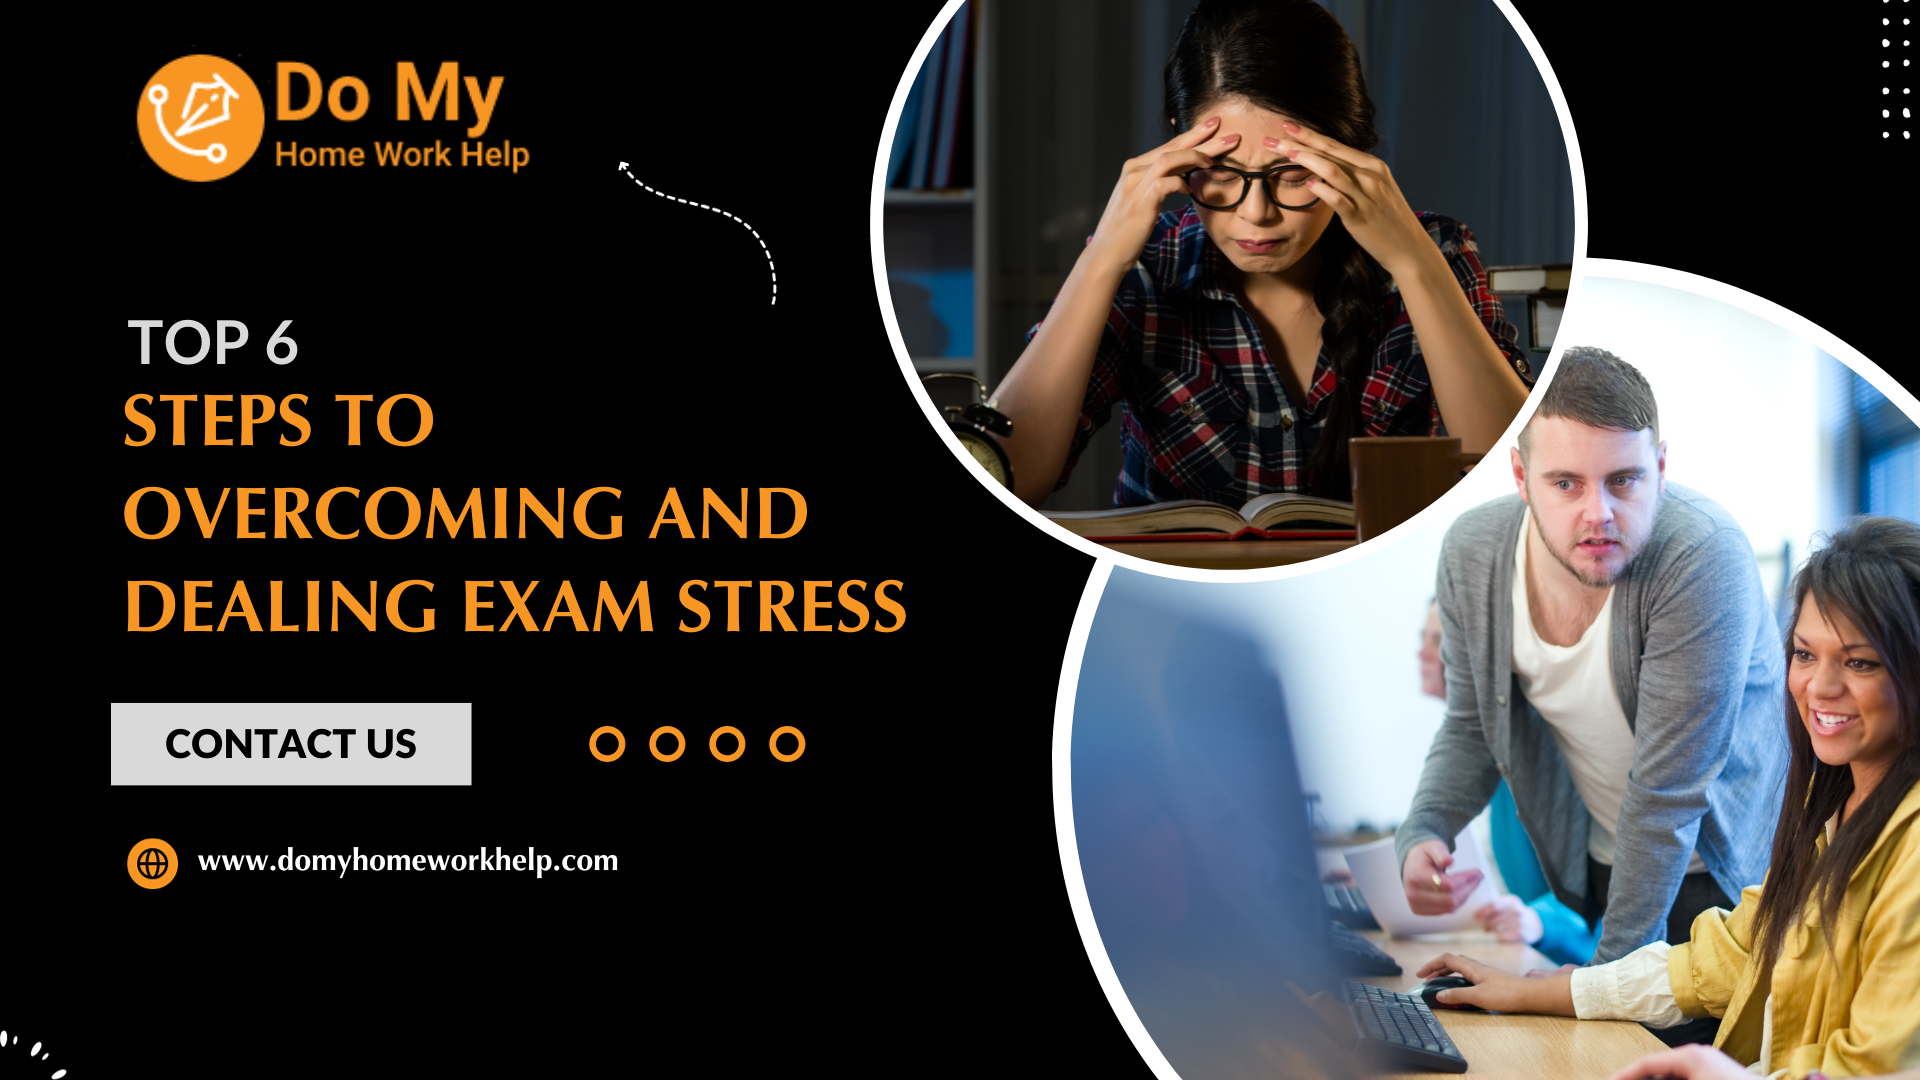 Top 10 Steps to Overcoming and Dealing Exam Stress